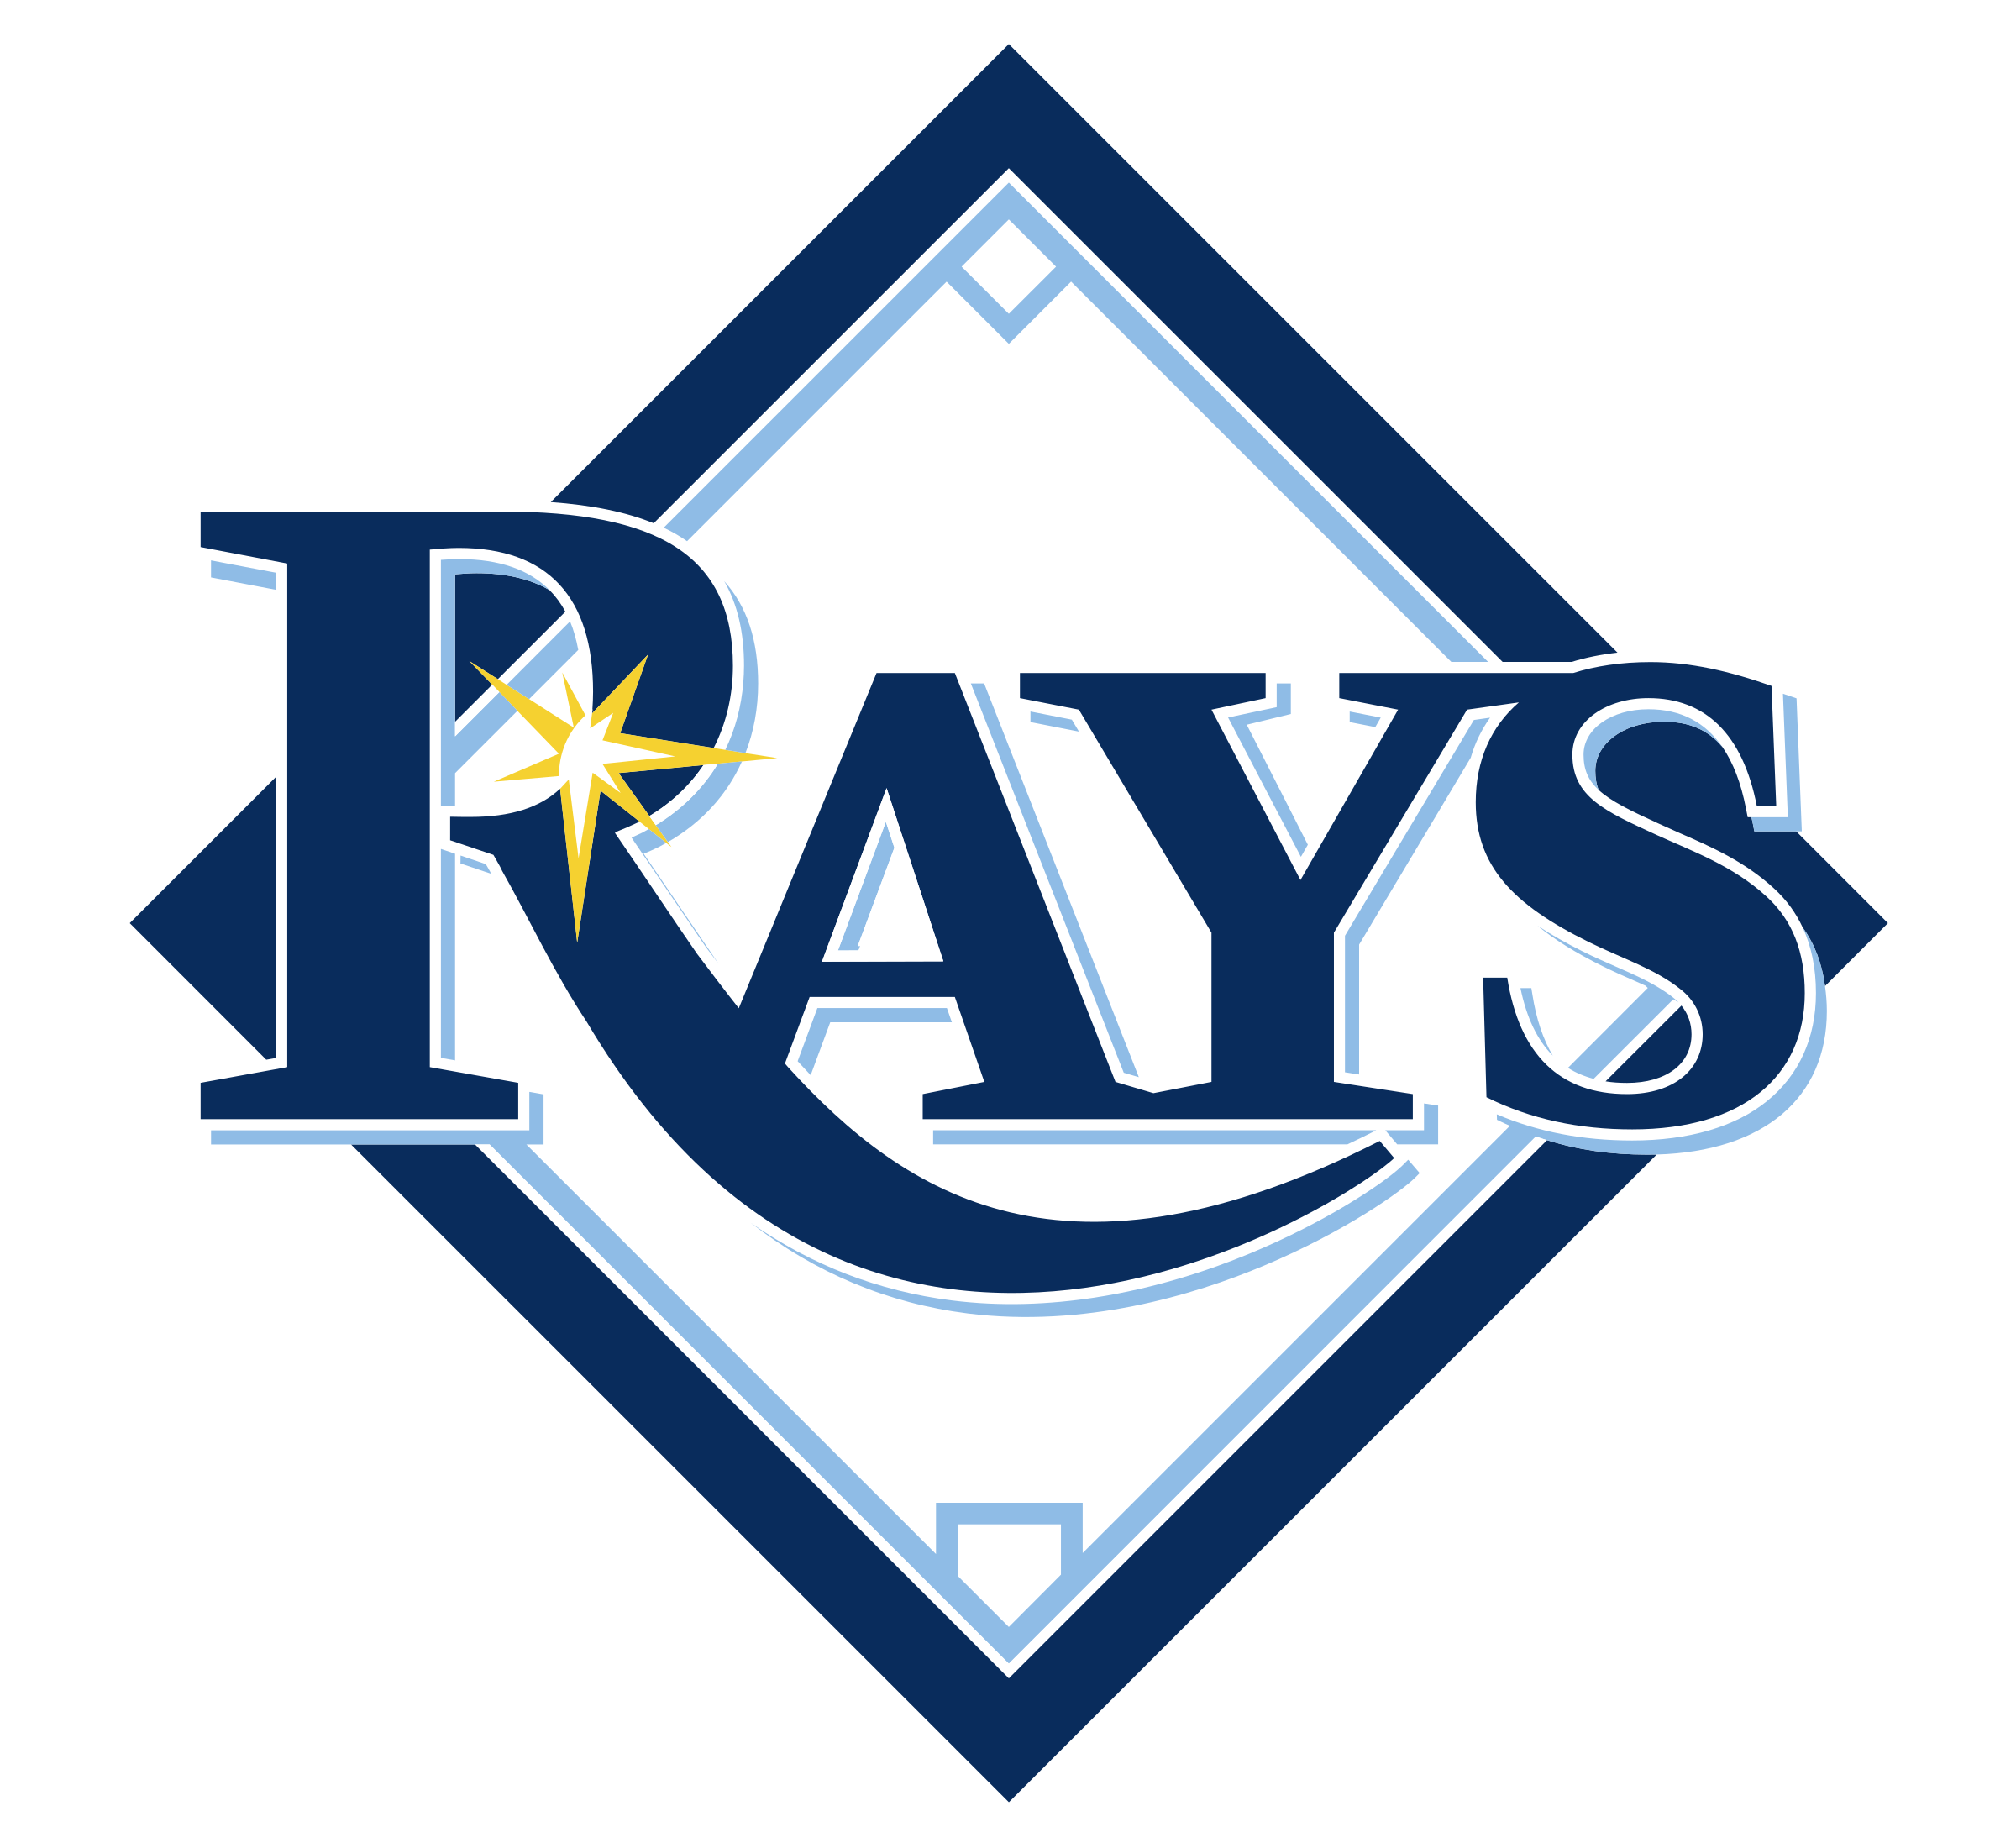 Tampa Bay Rays Odds & Bets